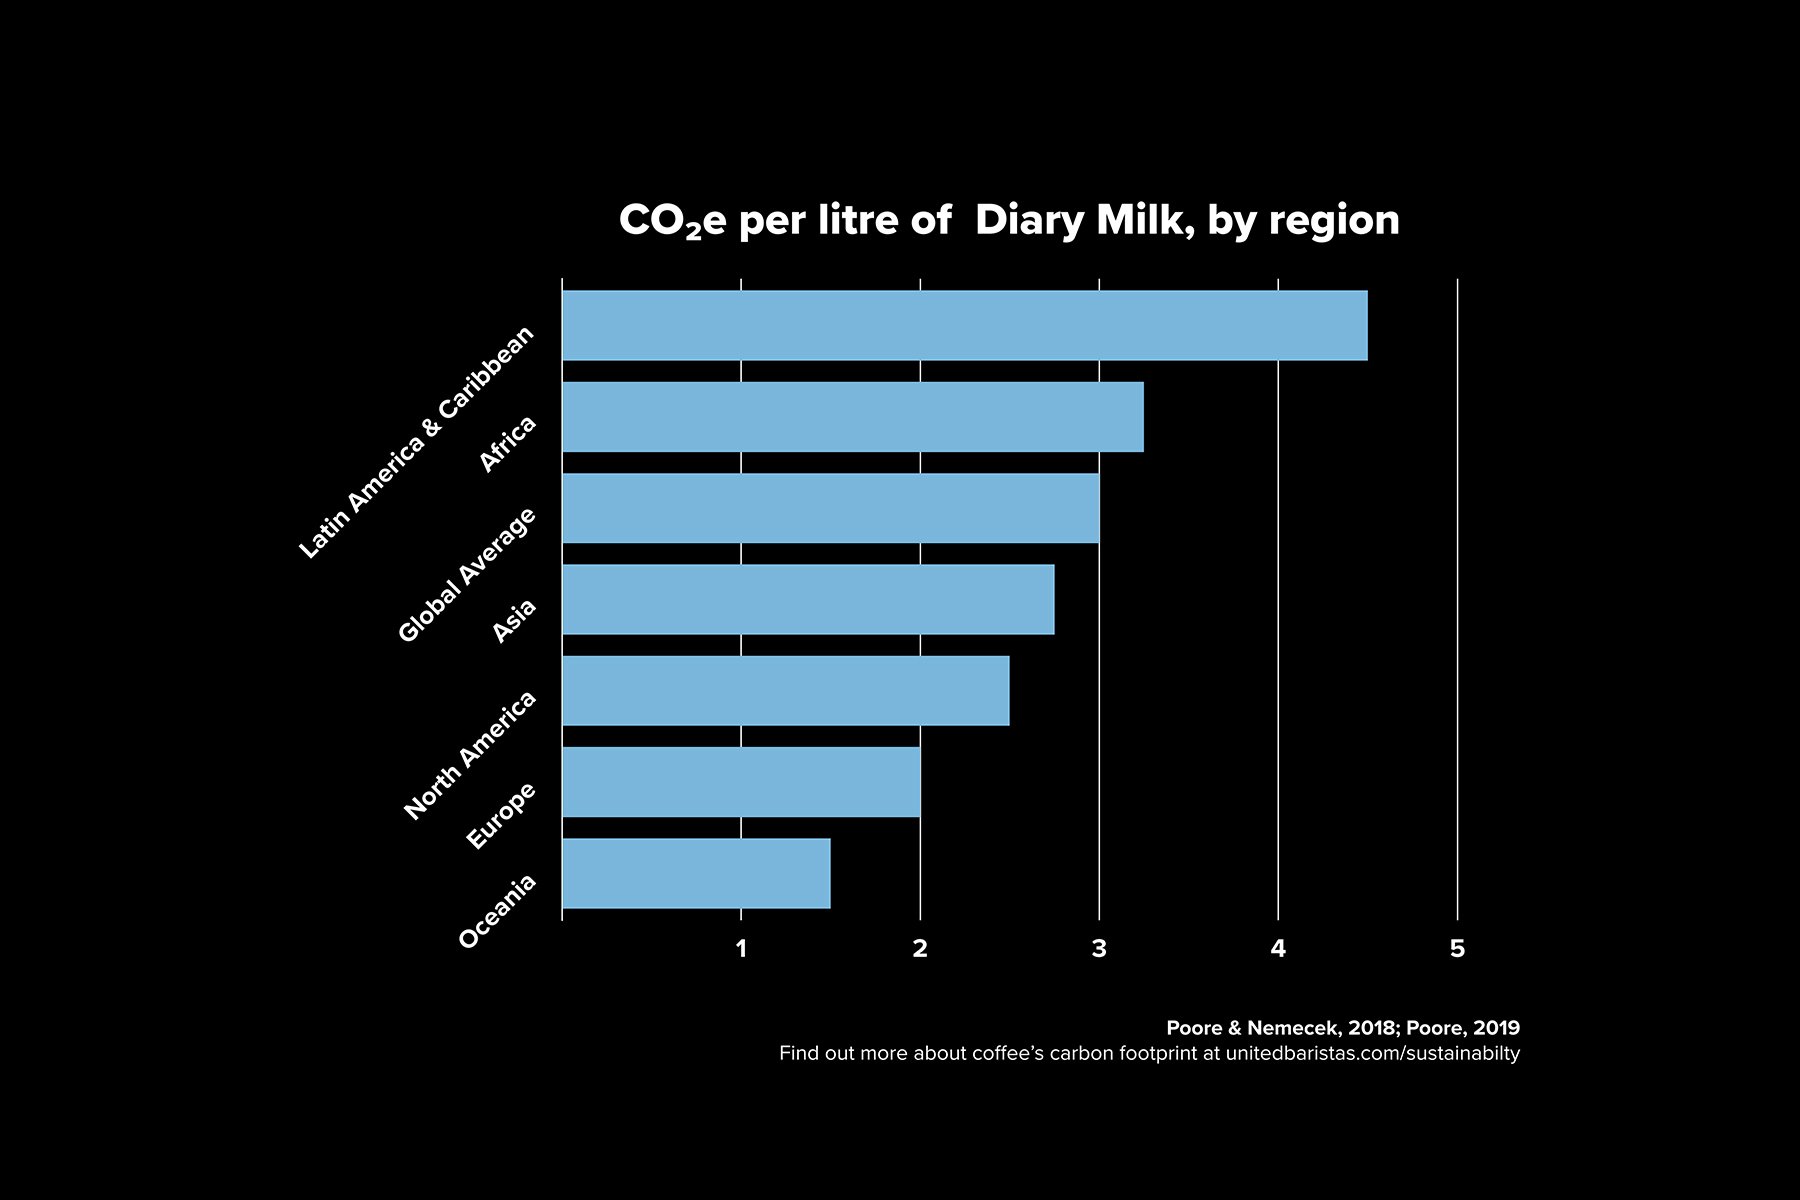 Carbon dioxide per litre of diary milk in Latin America, Africa, Asia, North America, Europe and Oceania